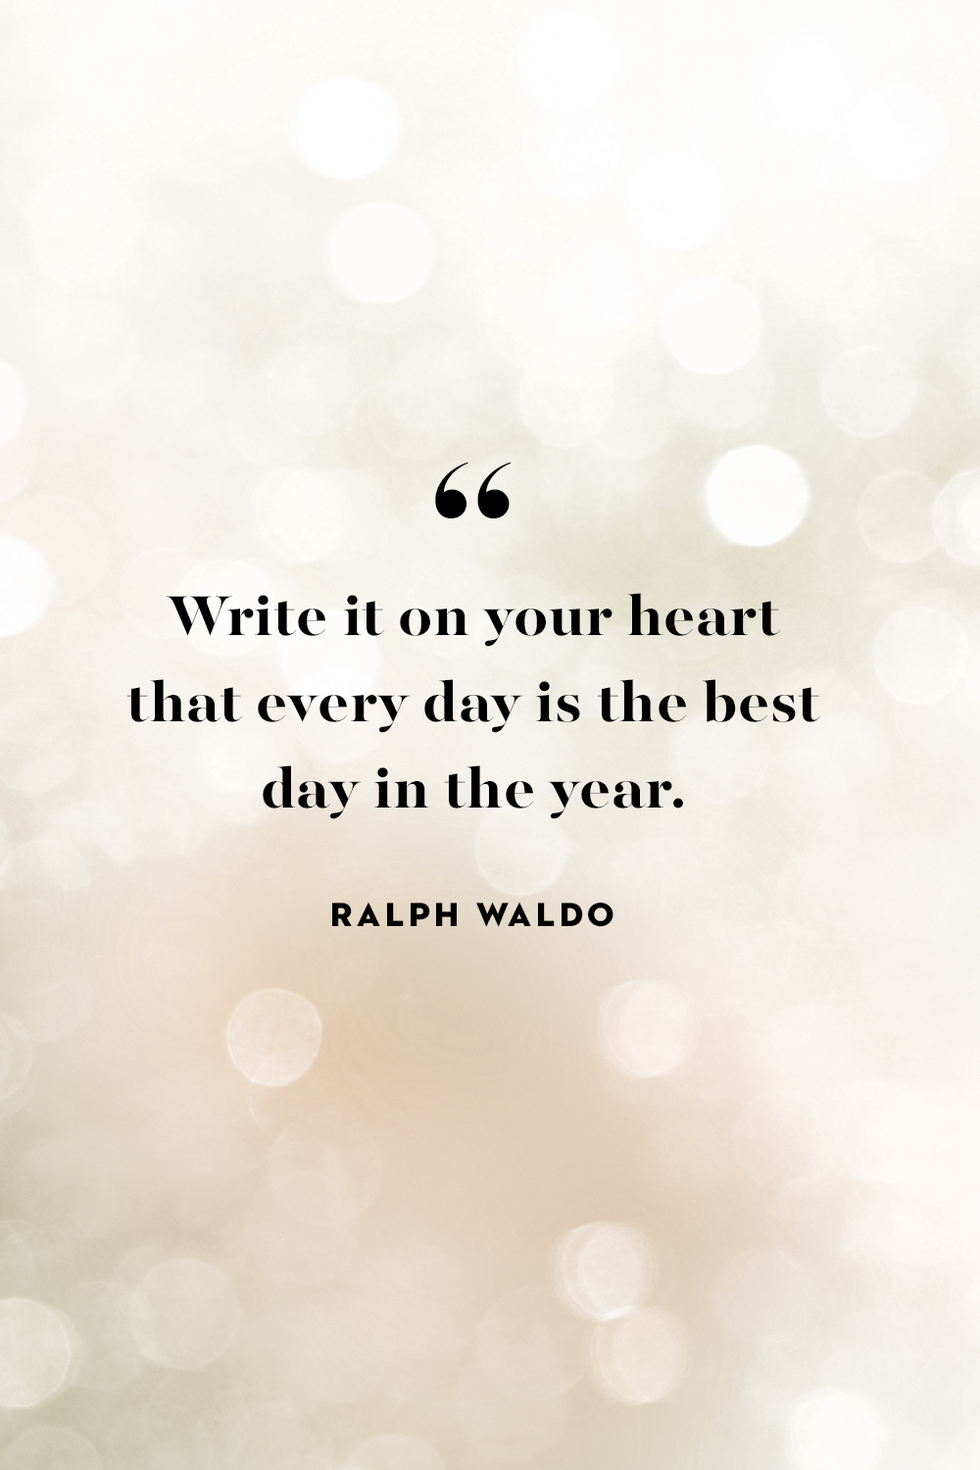 https://hips.hearstapps.com/hmg-prod/images/new-year-quotes-ralph-waldo-1666982701.png?crop=1xw:1xh;center,top&resize=980:*